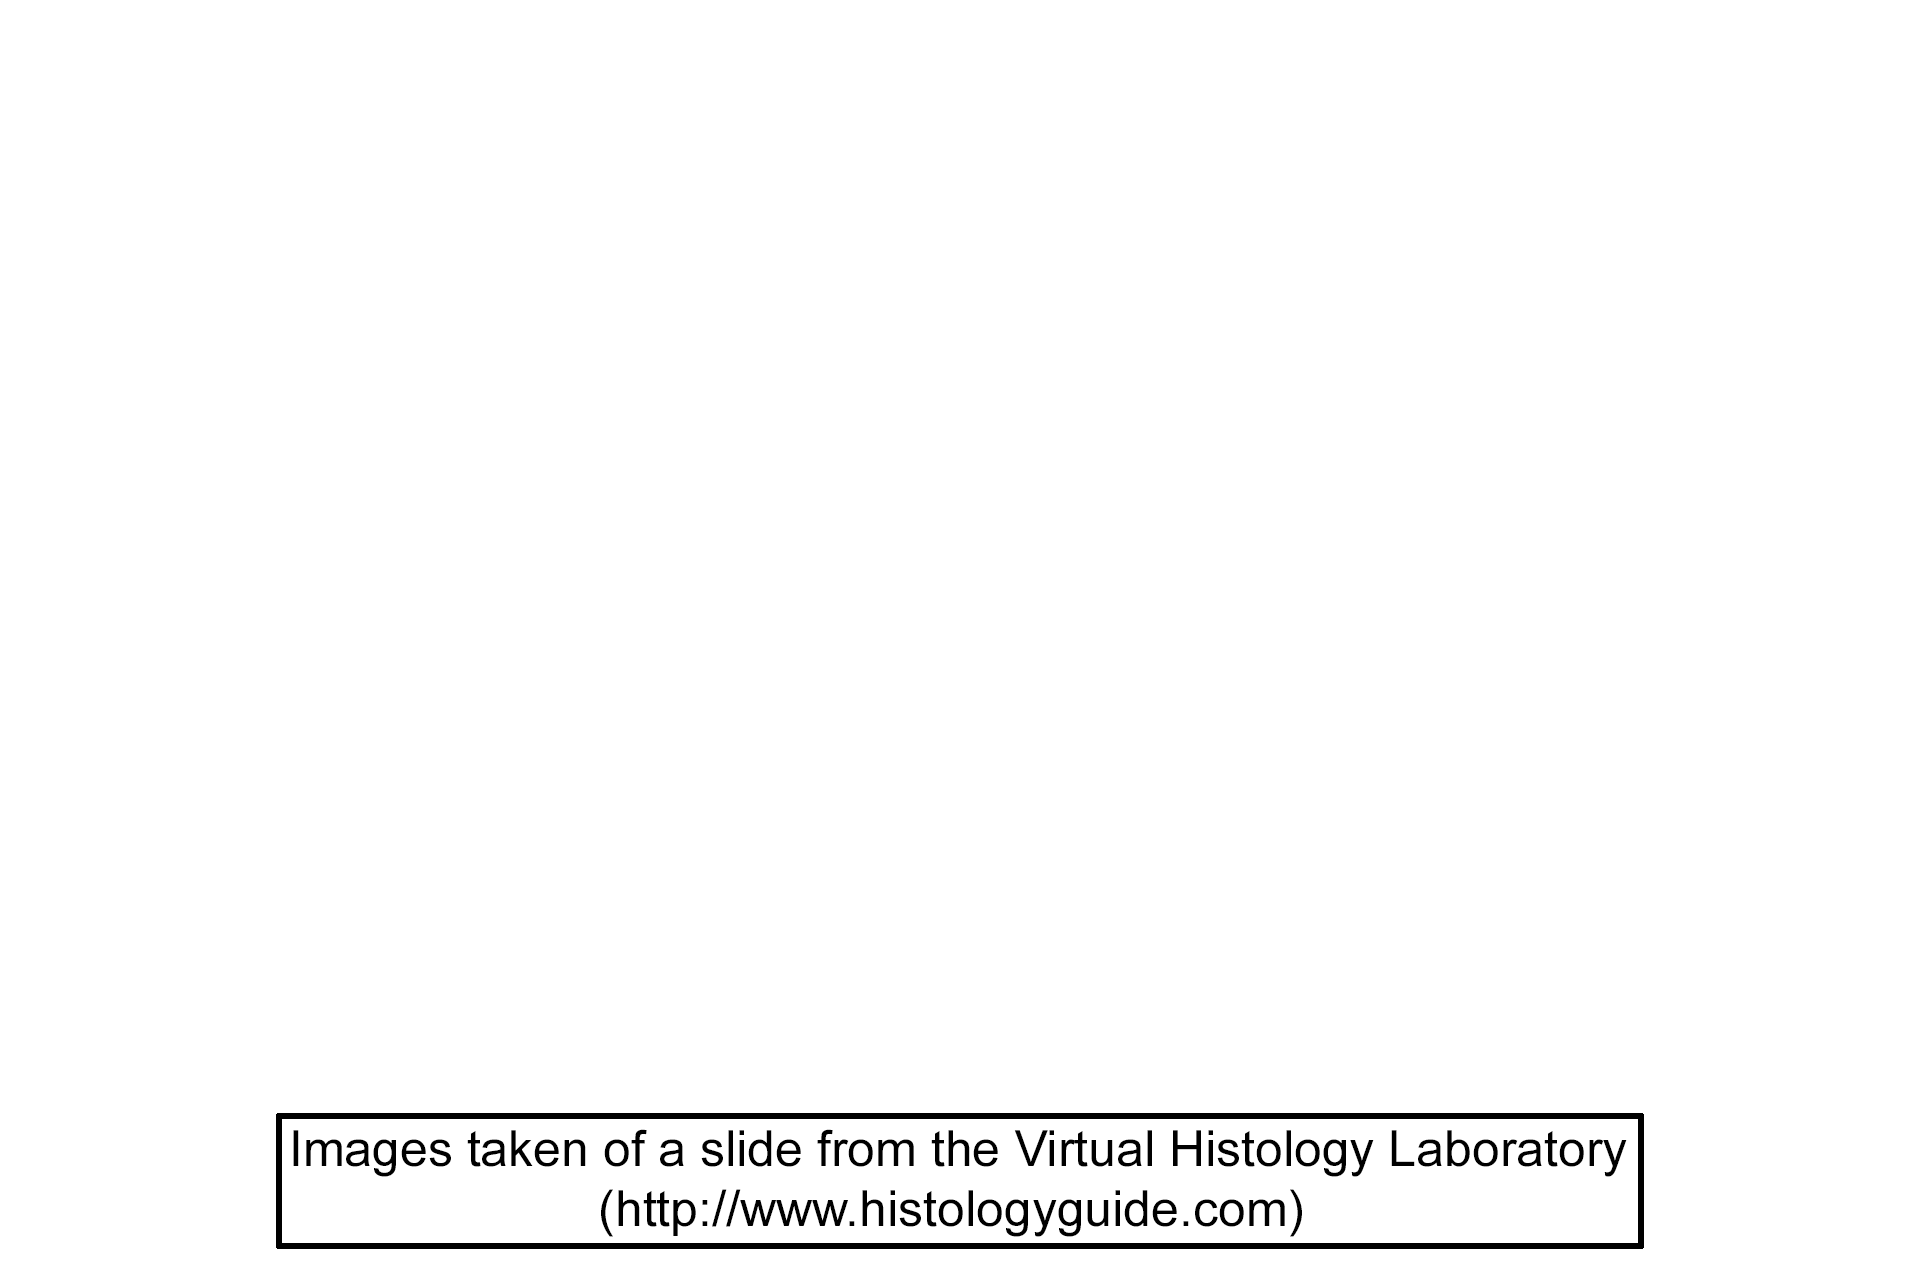 Image source > <p>The lower two images were taken from a section on the Virtual Microscopy Laboratory website (www.histologyguide.com).</p>
